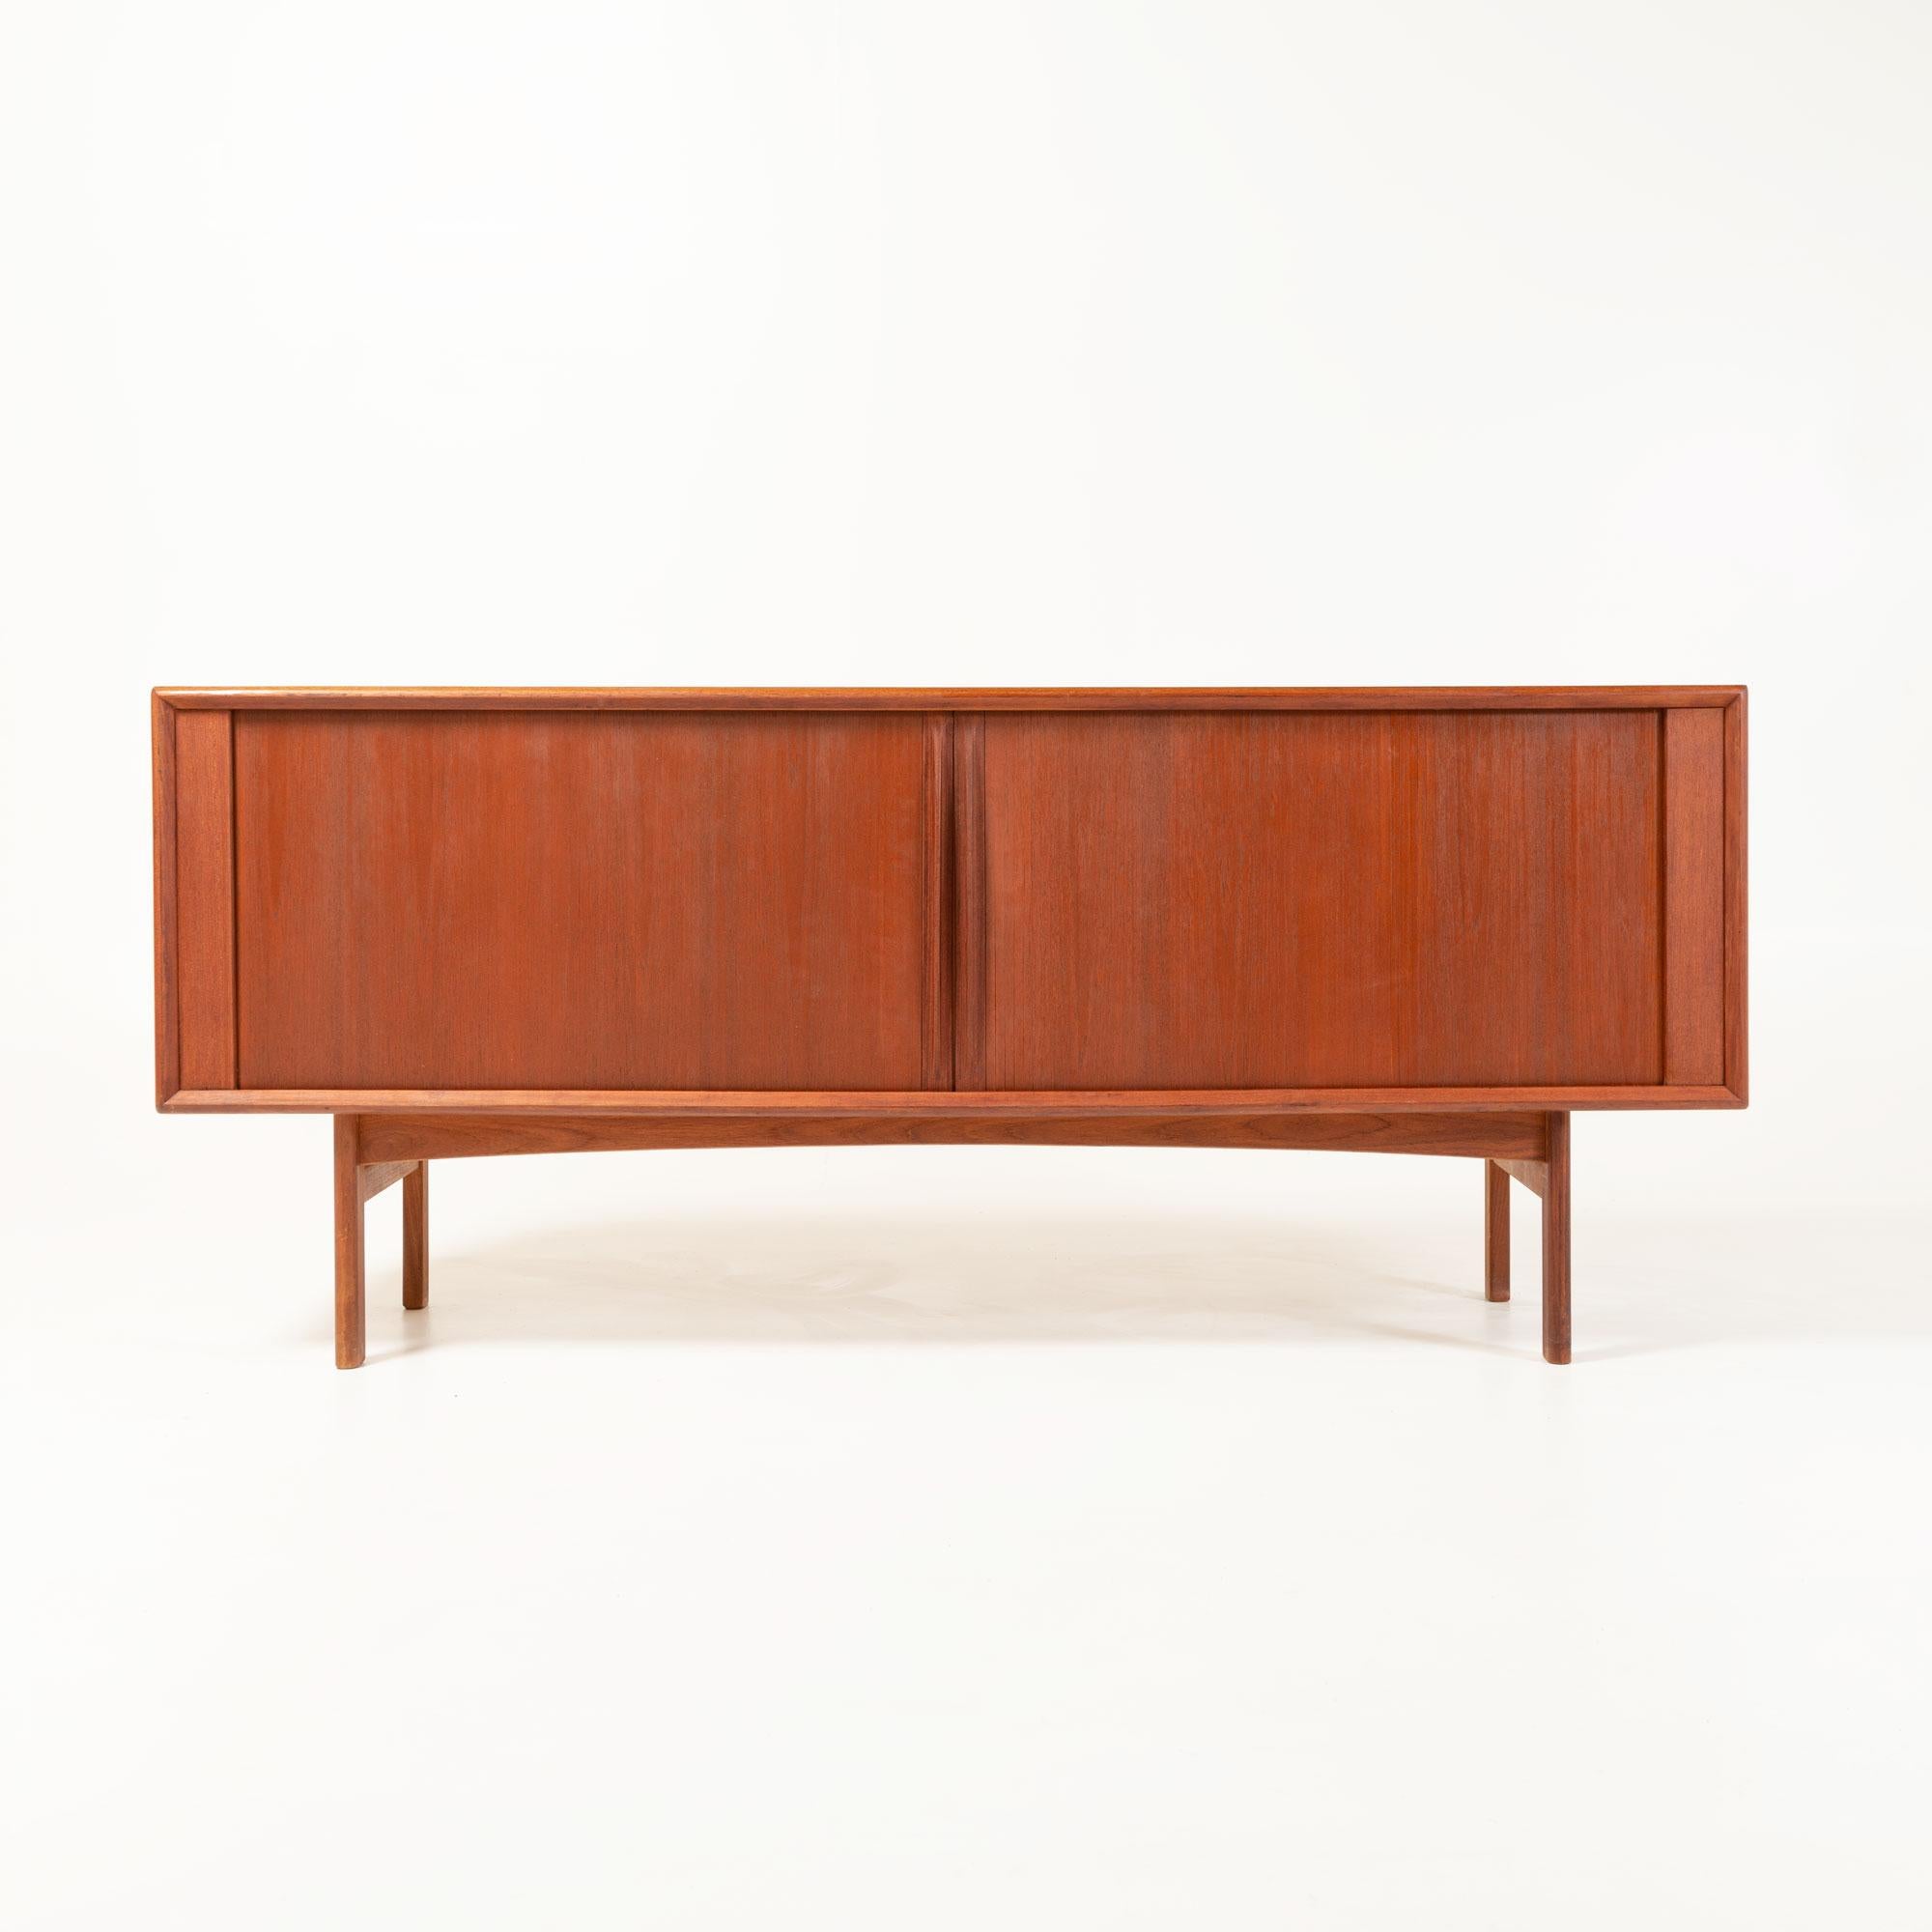 A classic Mid-Century Modern Danish Credenza with Tambour door, manufactured by Bernhard Pedersen & Son. In great vintage condition and has been recently restored.
    